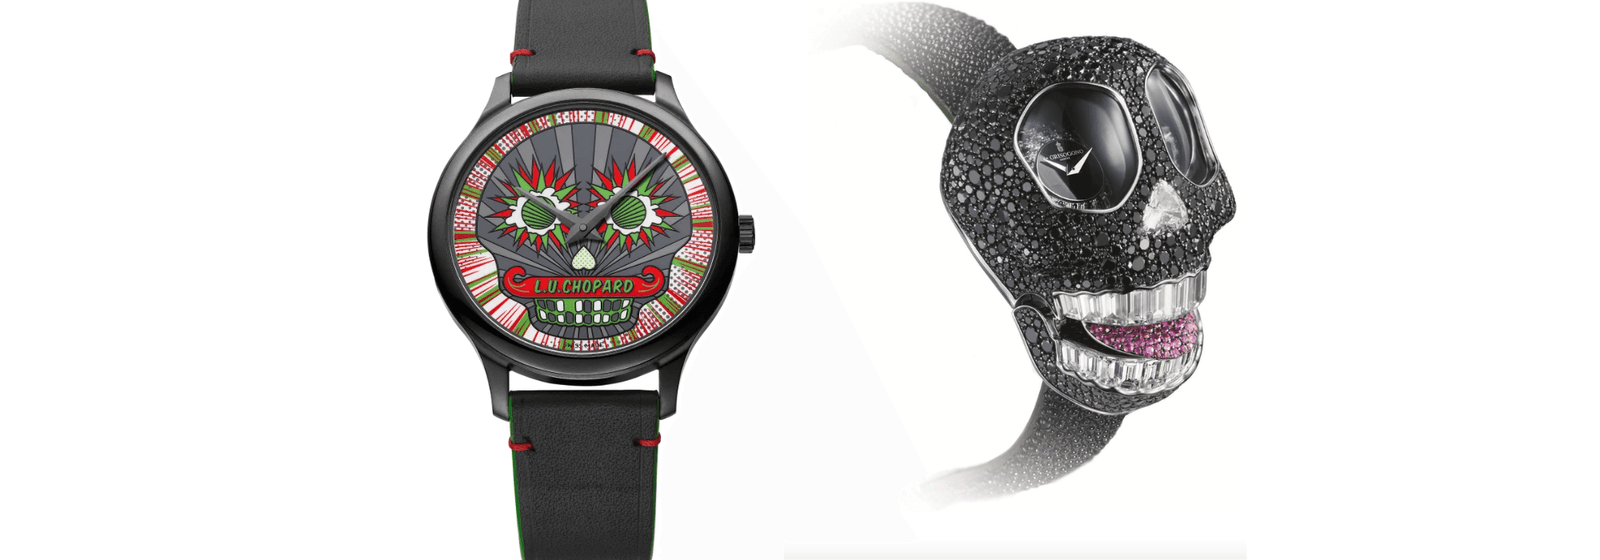 Watches That Elicit A Cringe-Worthy Reaction: A Bold Touch of Mortality and Artistry